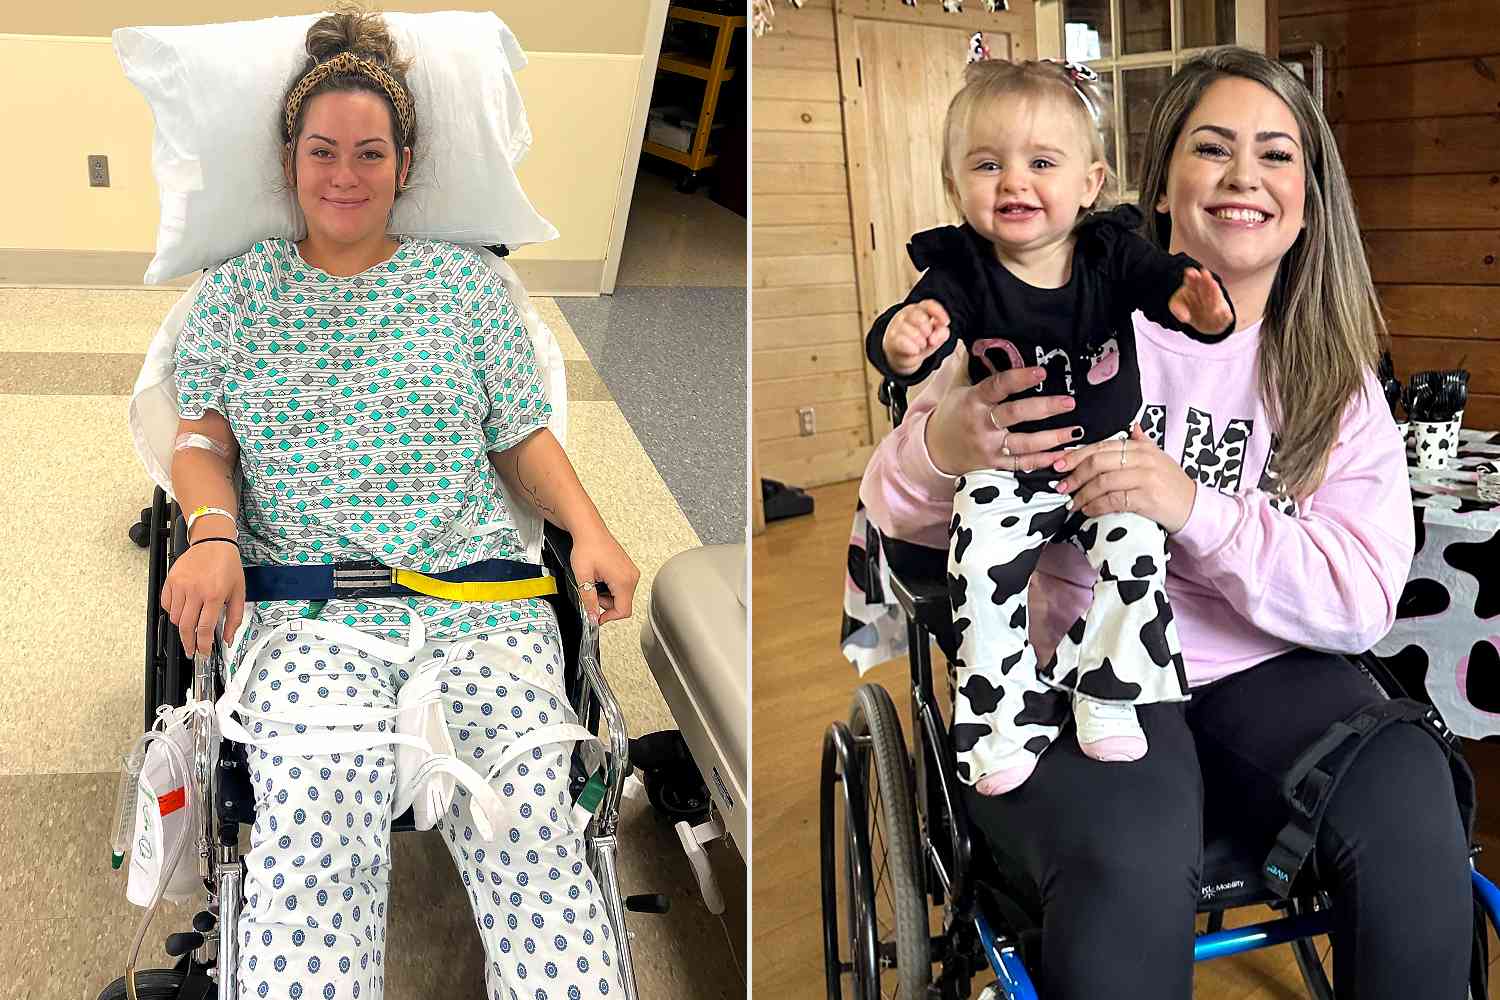 I Was Paralyzed After Fall, Learned to Walk Again with Toddler [Video]